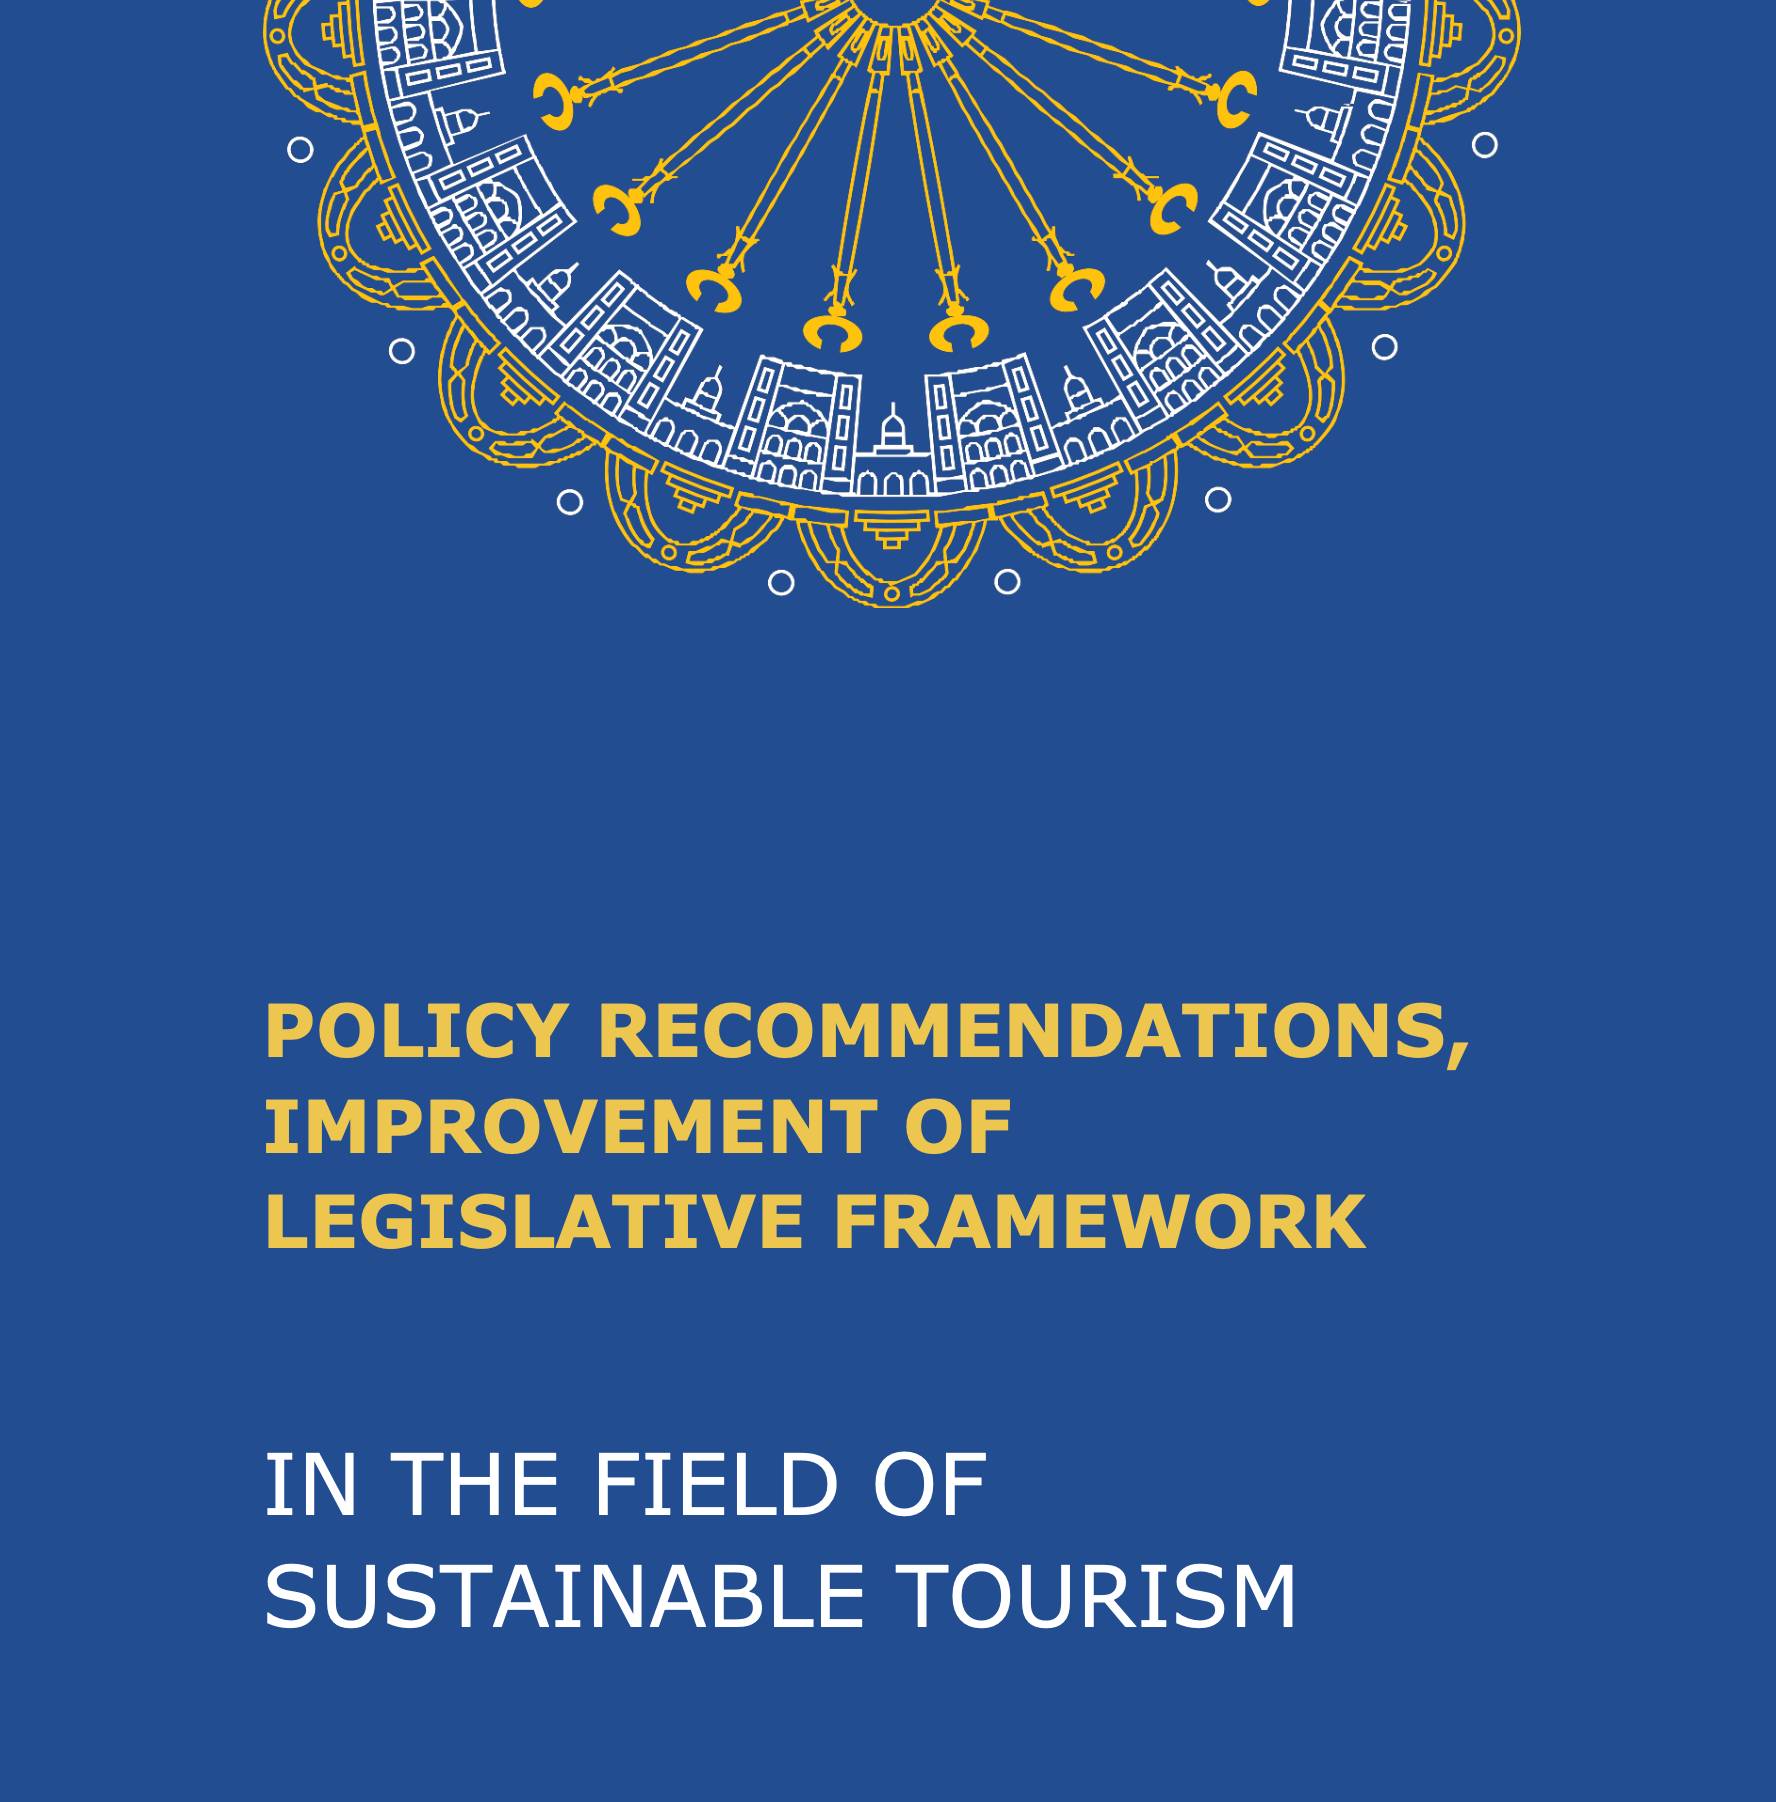 Policy Recommendations, Improvement of Legislative Framework in the field of Sustainable Tourism